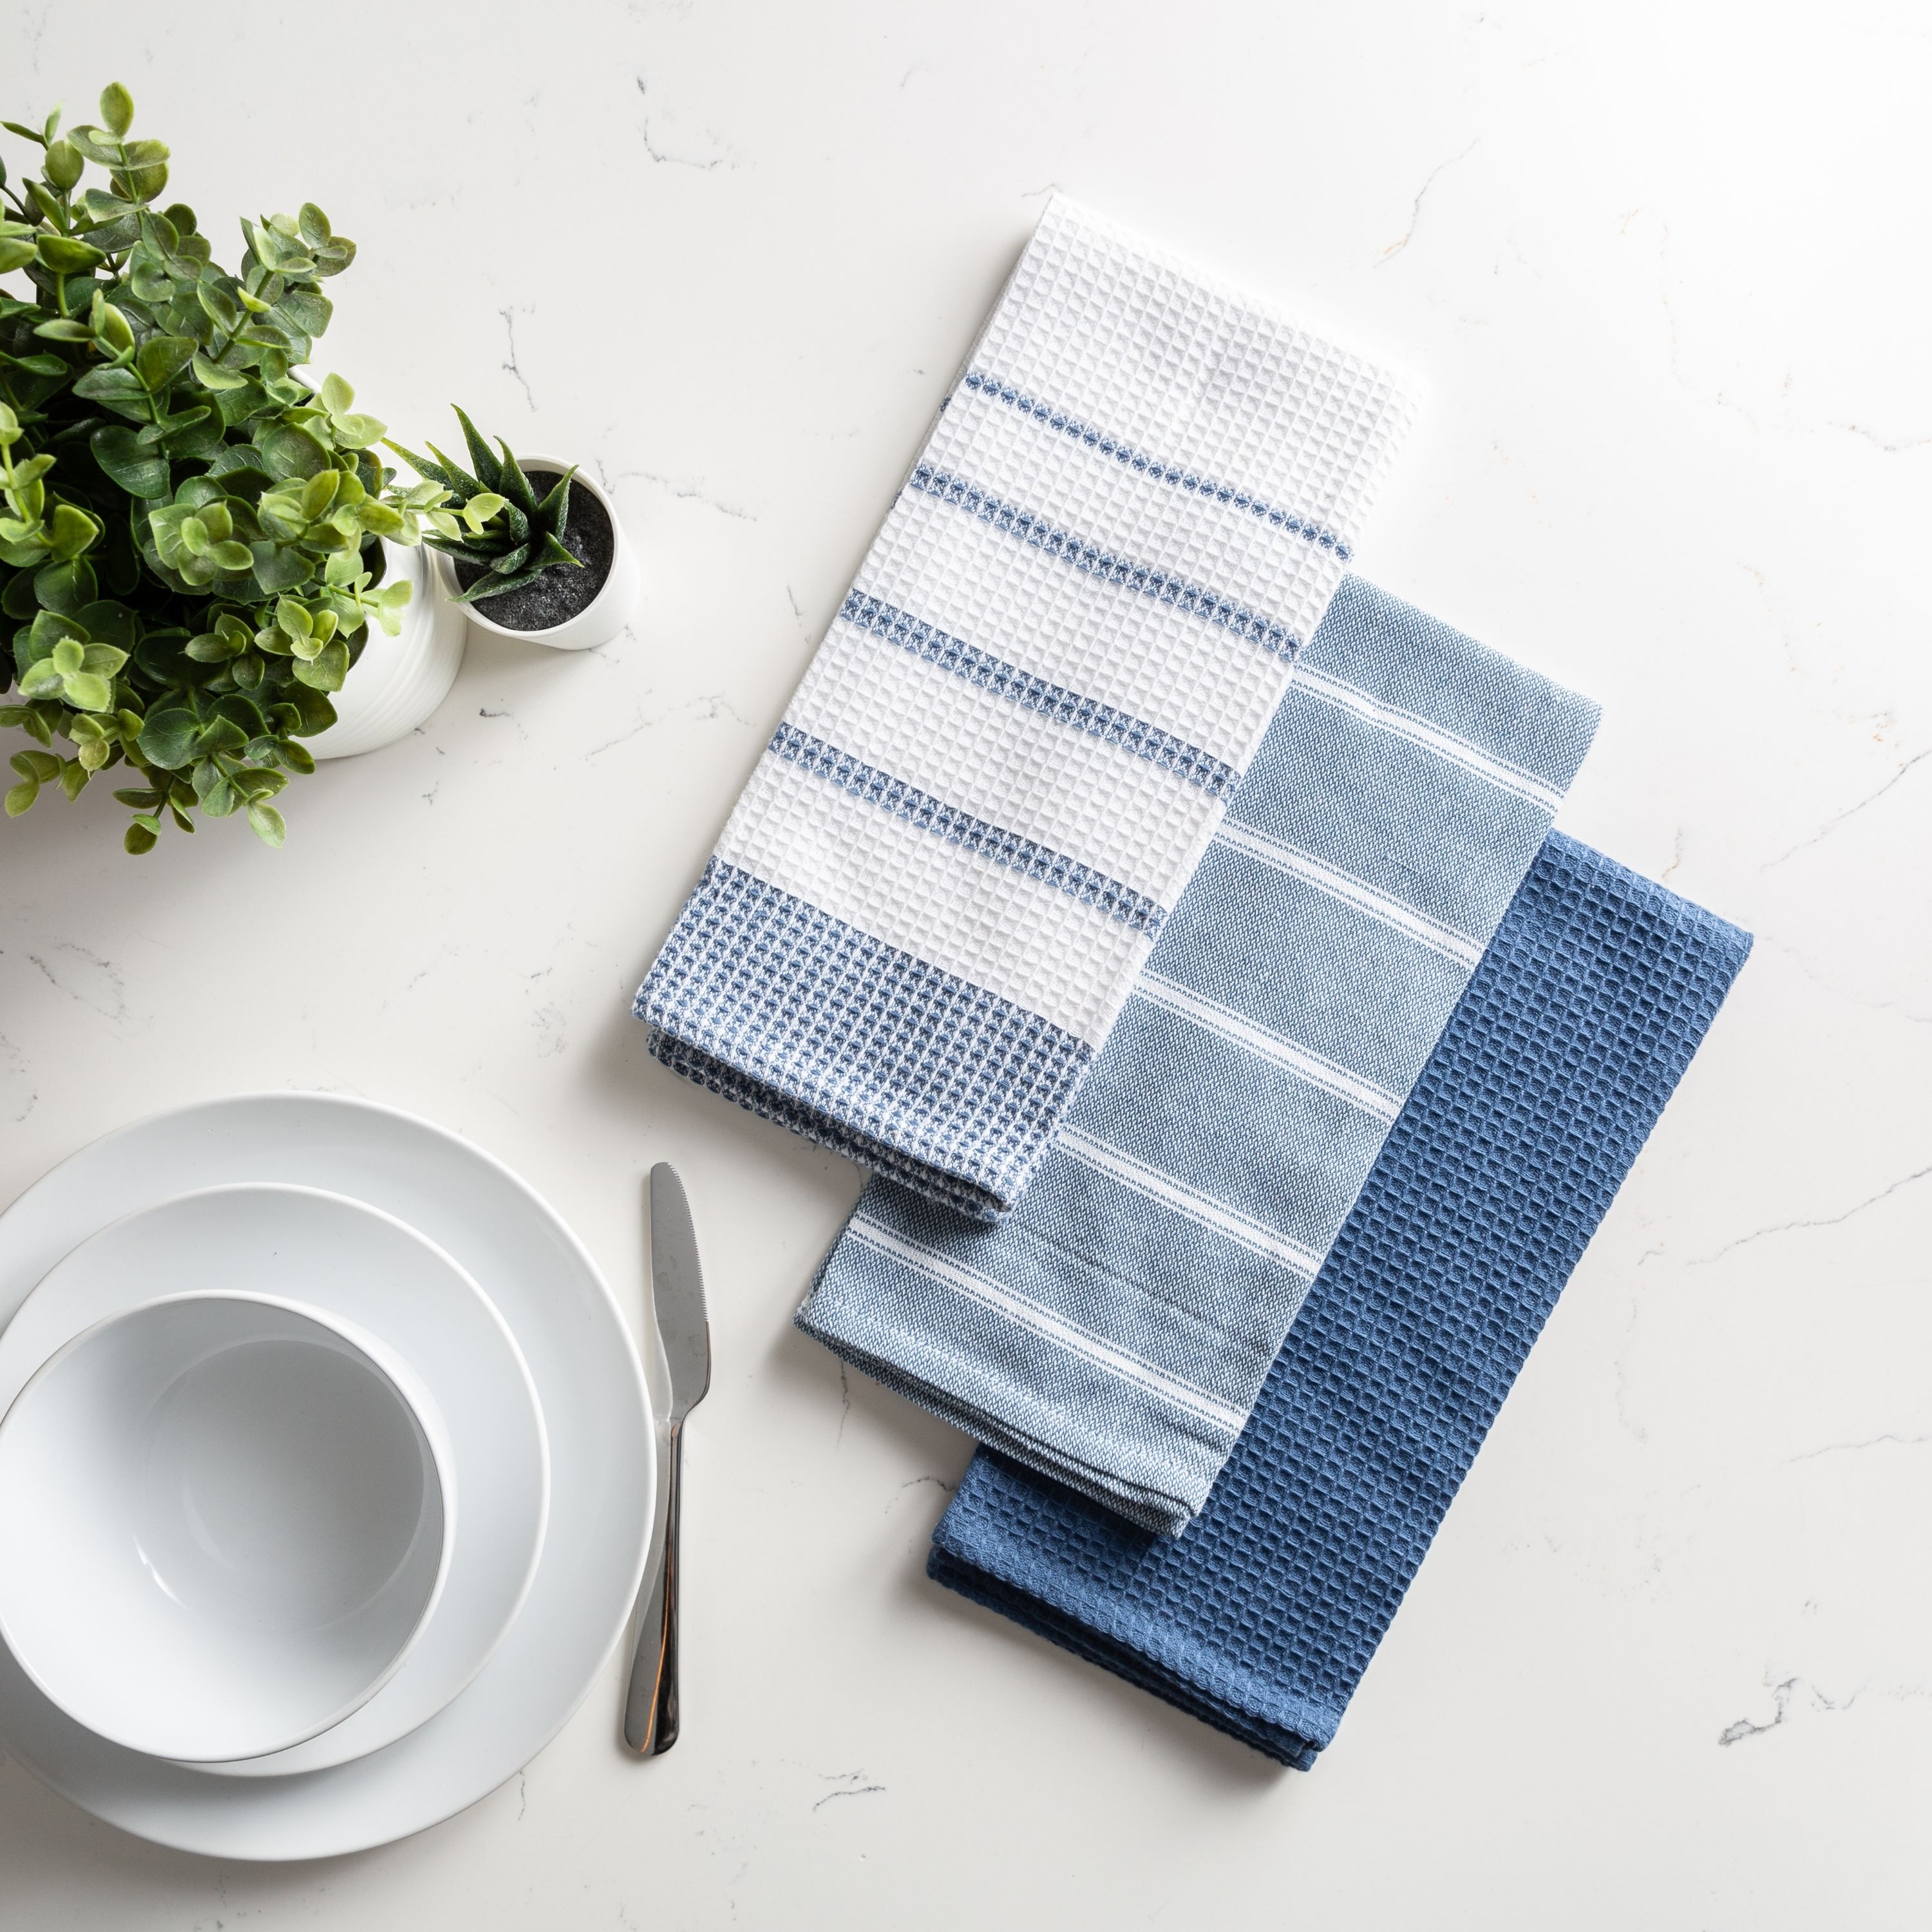 https://ak1.ostkcdn.com/images/products/is/images/direct/6d13c8602defc58158e5c5a1b8cda7866fe51ef2/Fabstyles-Fouta-Cotton-Set-of-3-Kitchen-Towel.jpg